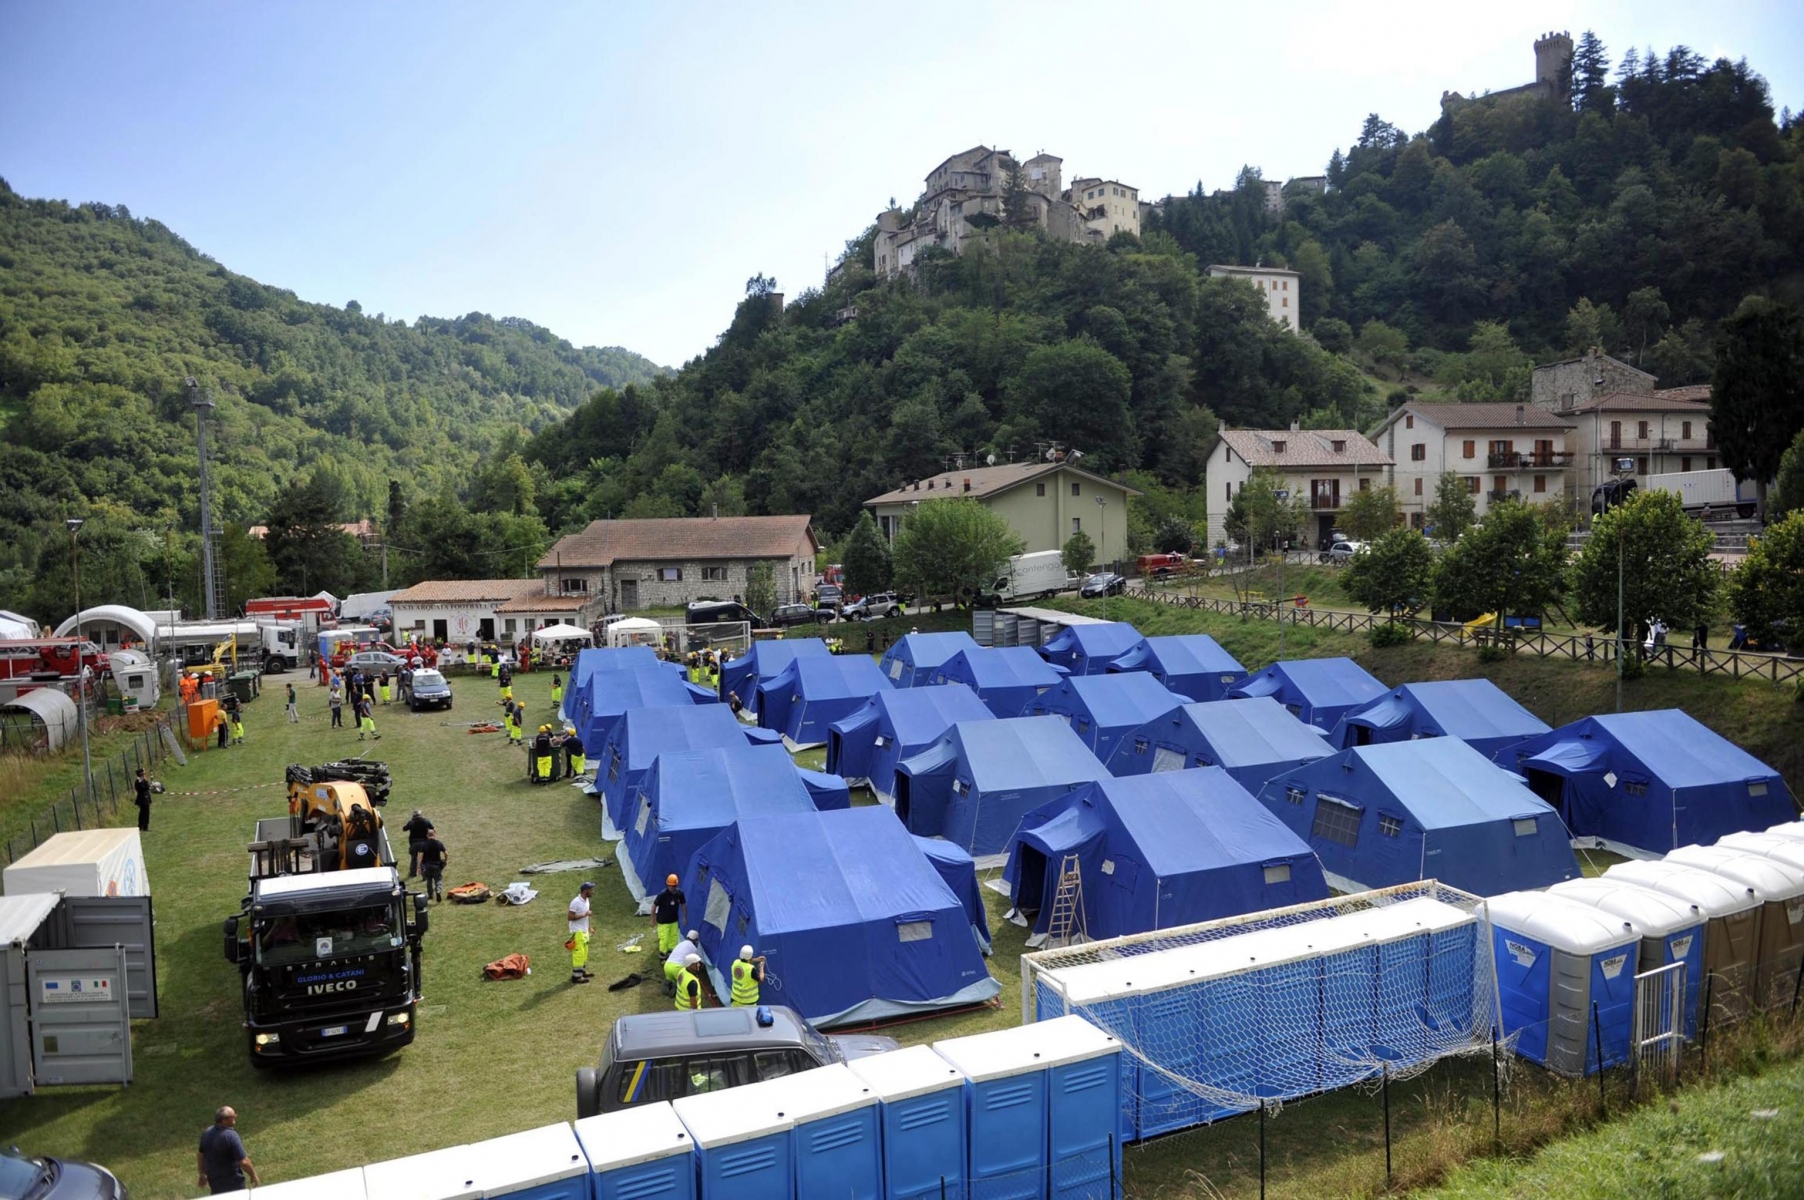 epa05510235 A general view of the tent camp in Arquata Del Tronto, Italy, 25 August 2016, after the 6.2 earthquake struck Italy, on 24 August 2016 that killed at least 247 people. The quake was felt across a broad section of central Italy, in Umbria, Lazio and Marche Regions, including the capital Rome. An Italian cabinet meeting on 25 August 2016 will declare a state of emergency in the areas hit by the earthquake and will earmark 234 million euros from the national emergencies fund, political sources said.  EPA/CRISTIANO CHIODI ITALY EARTHQUAKE